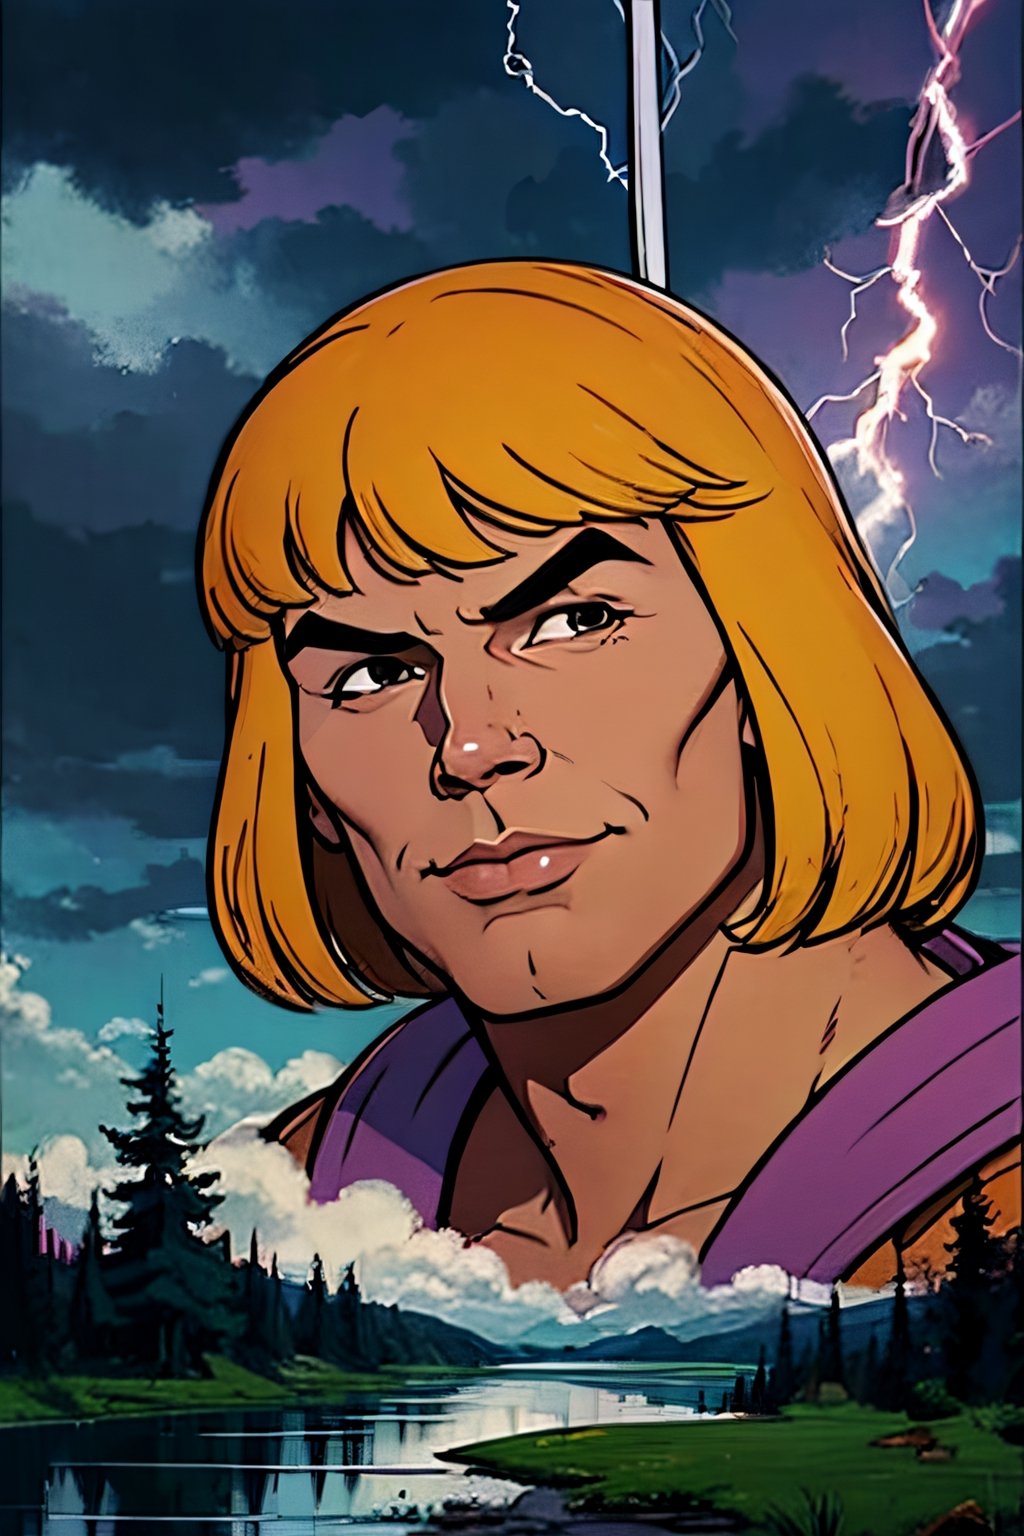 He-man, facial portrait, sexy stare, smirked, on top of hill, forest, lake, cloudy sky, lightning, ,he-man, holding sword of power up